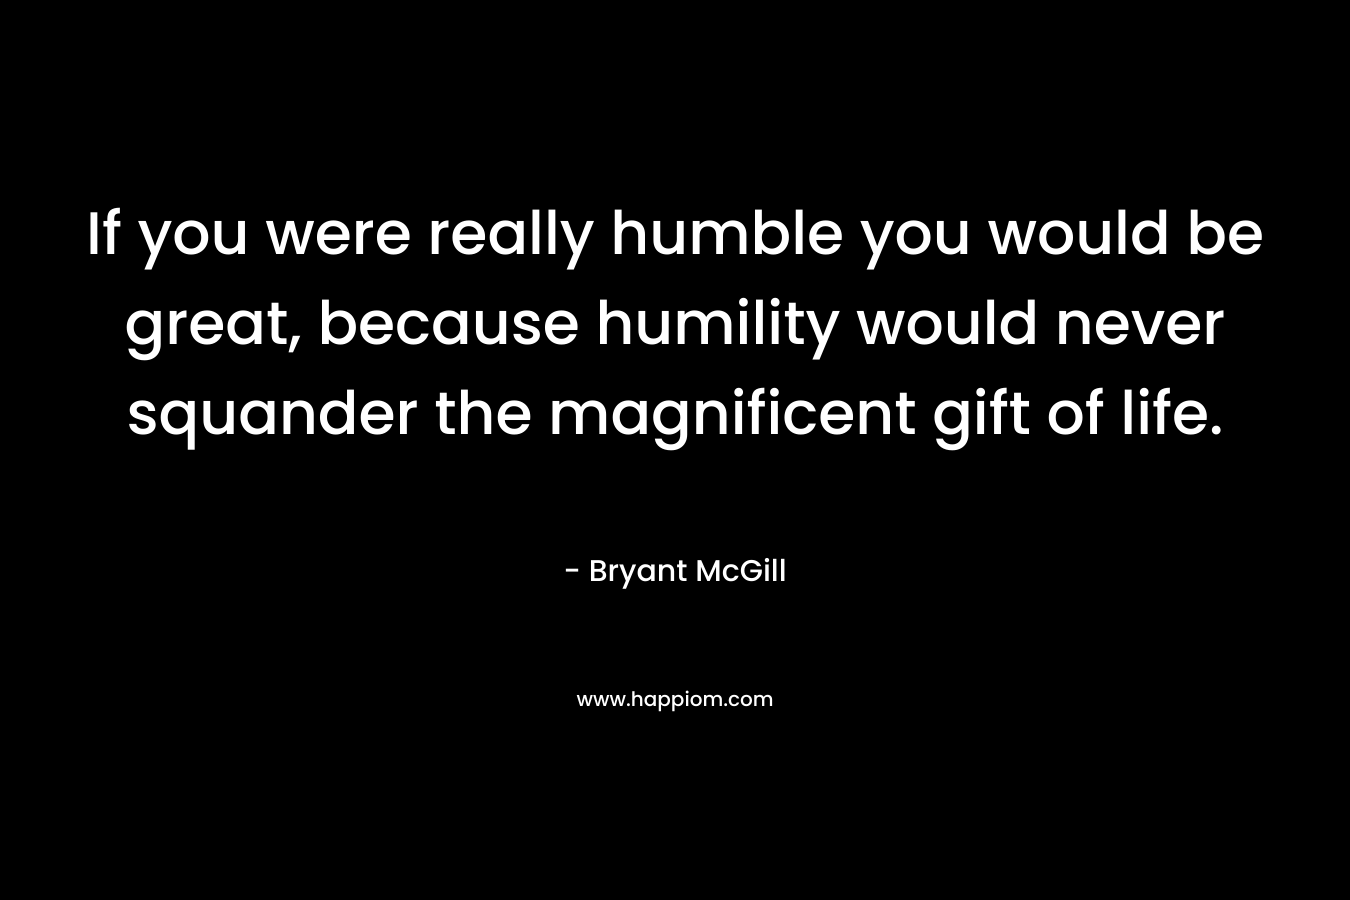 If you were really humble you would be great, because humility would never squander the magnificent gift of life. – Bryant McGill